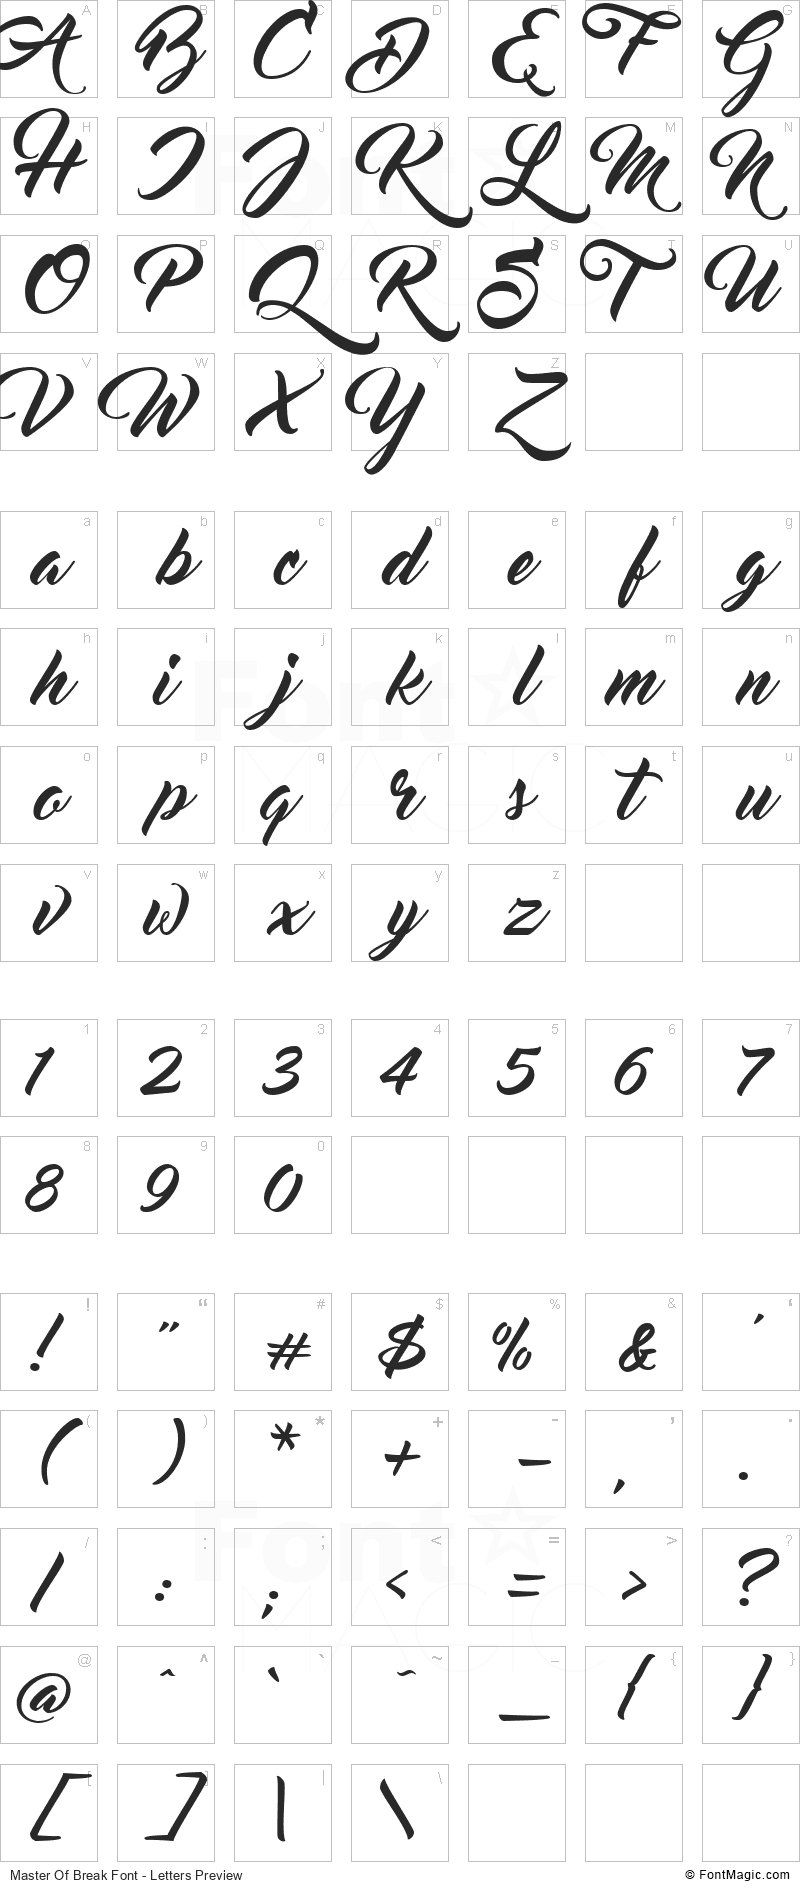 Master Of Break Font - All Latters Preview Chart